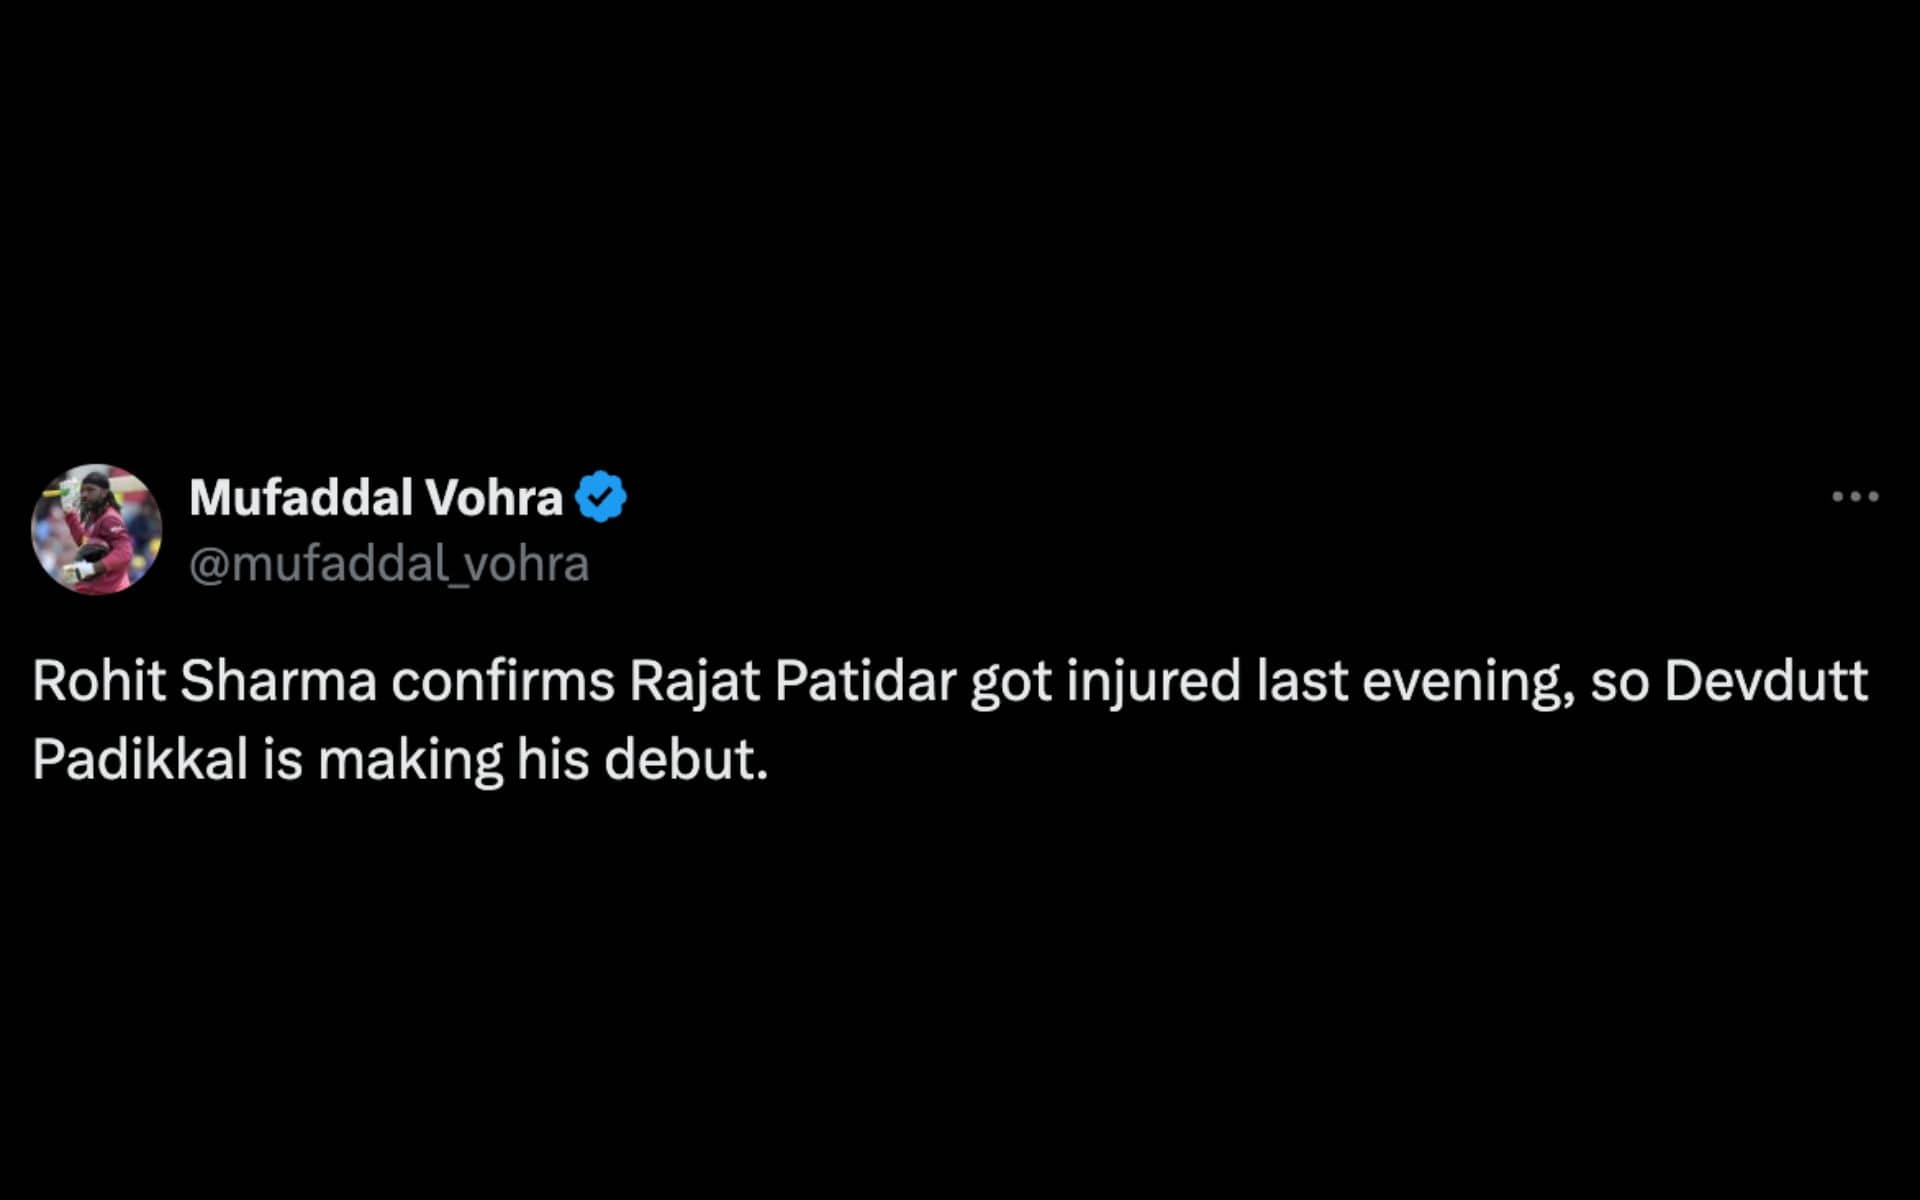 Rohit Sharma on Patidar's absence from IND vs ENG 5th Test